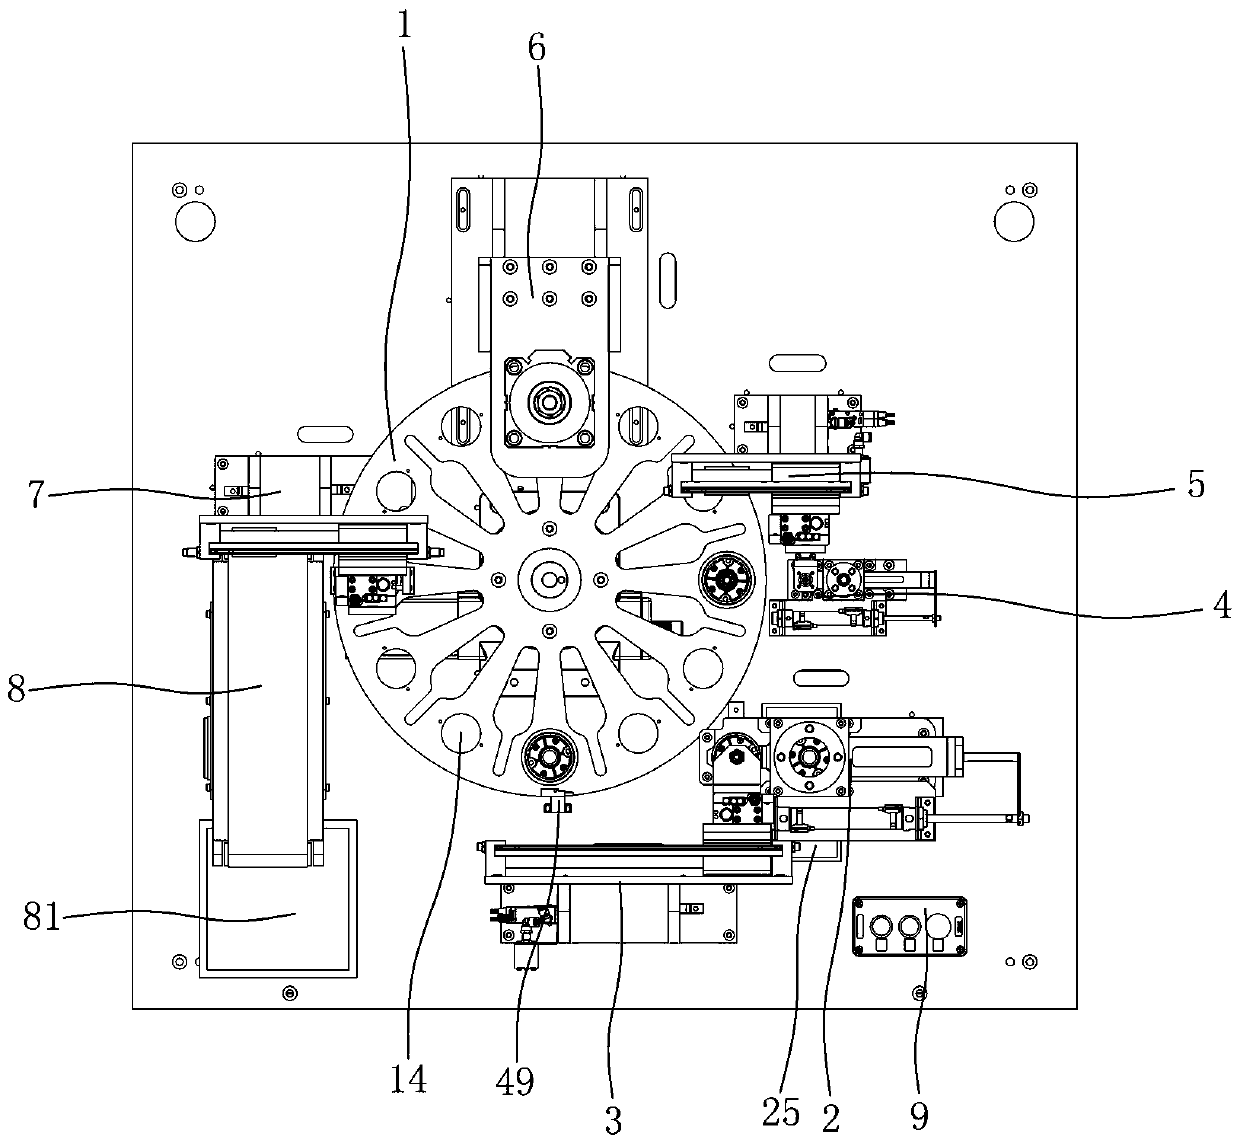 Automatic press-fitting device for motor end cover and bearing